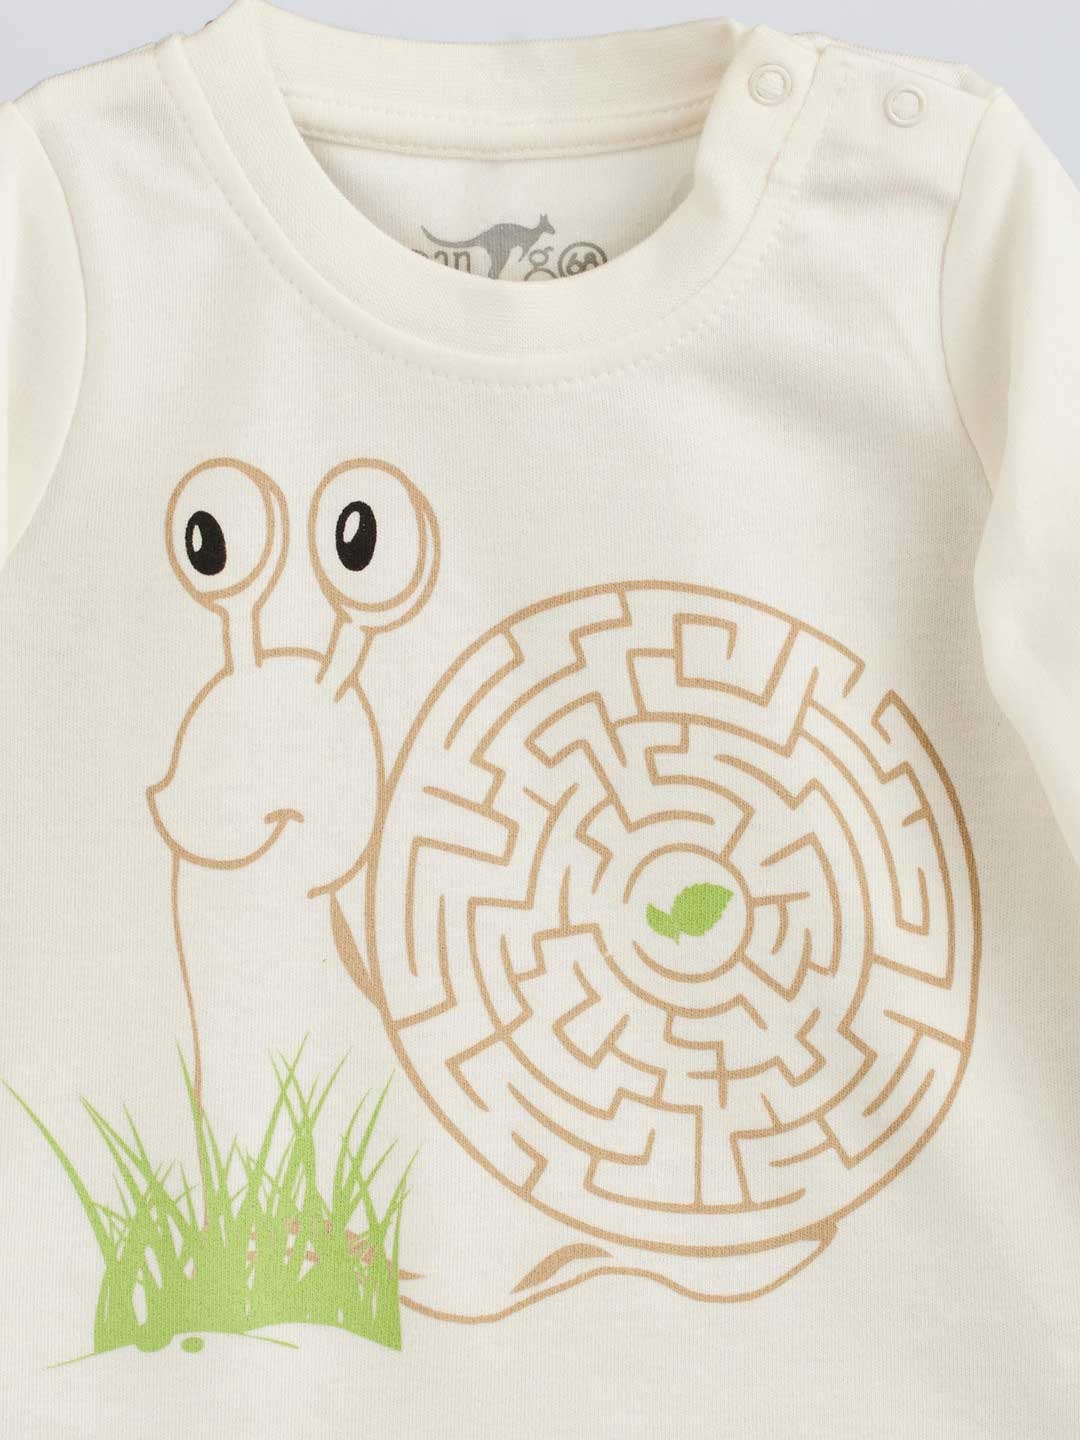 The Snail print from newborn pajamas Snails 300 blouse features a cute smiling snail that has the shell drawn like a maze, with a green leaf in center of the shell/maze. Tufts of grass sit in front of the snail.